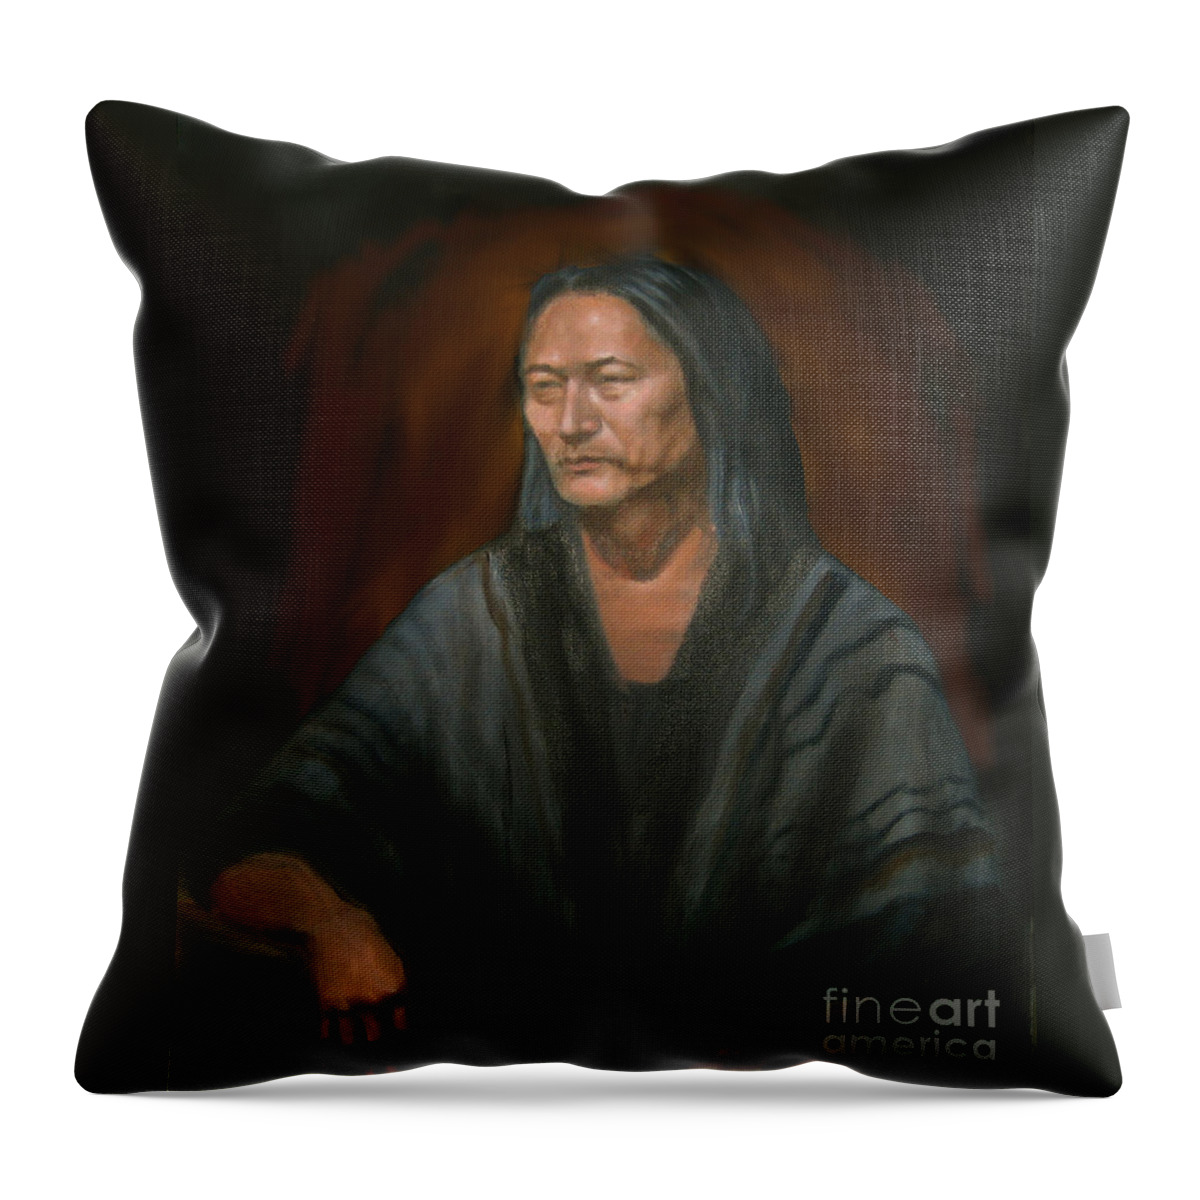  Throw Pillow featuring the painting #m14'11 by Sam Shacked